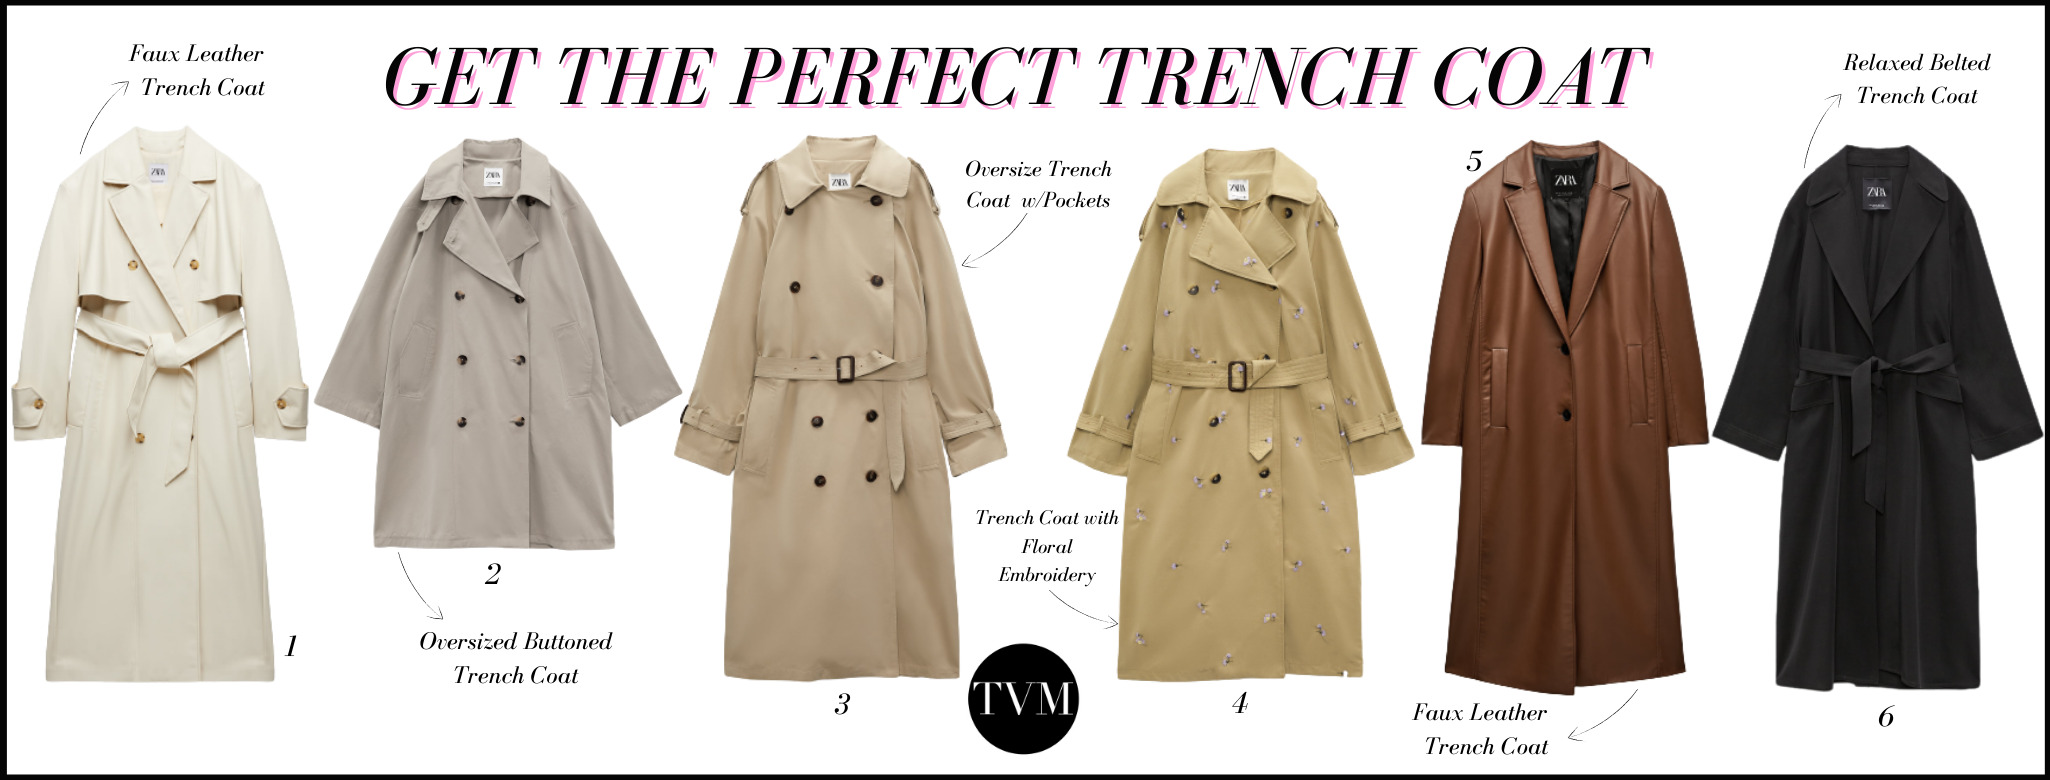 How to style a trench coat